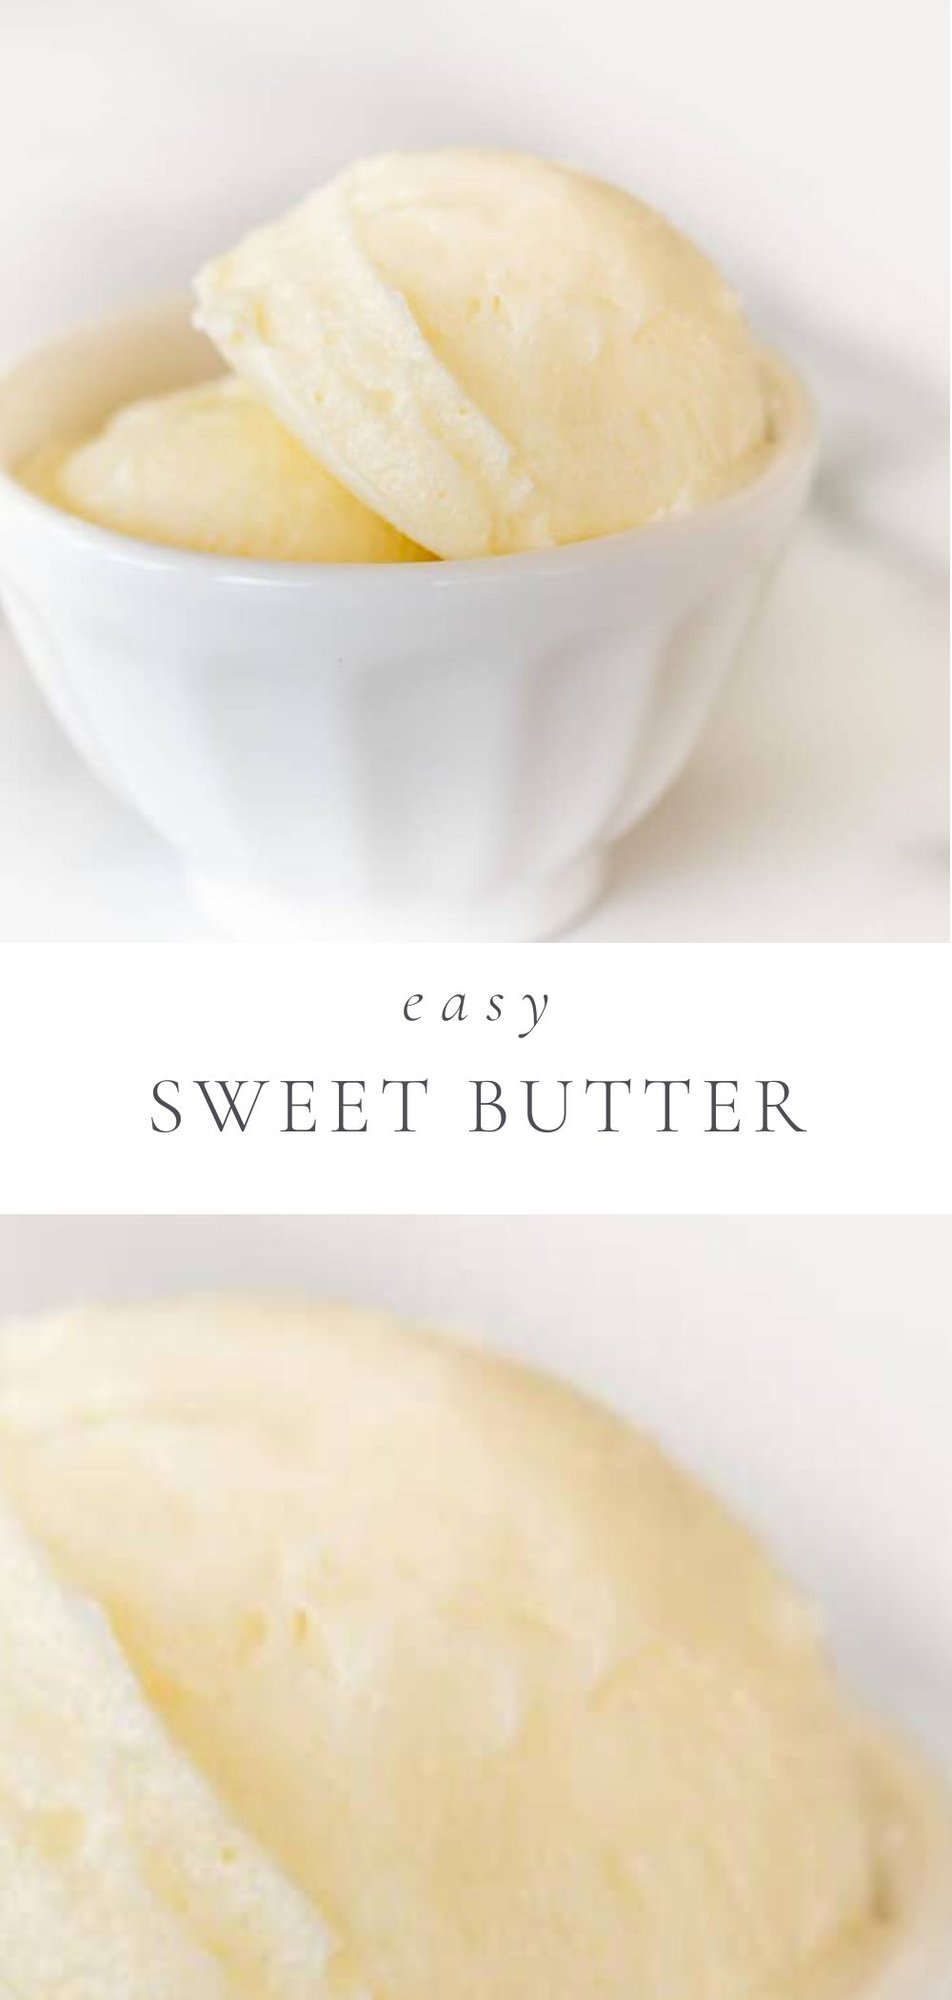 sweet butter in bowl, overlay text, close up of sweet butter